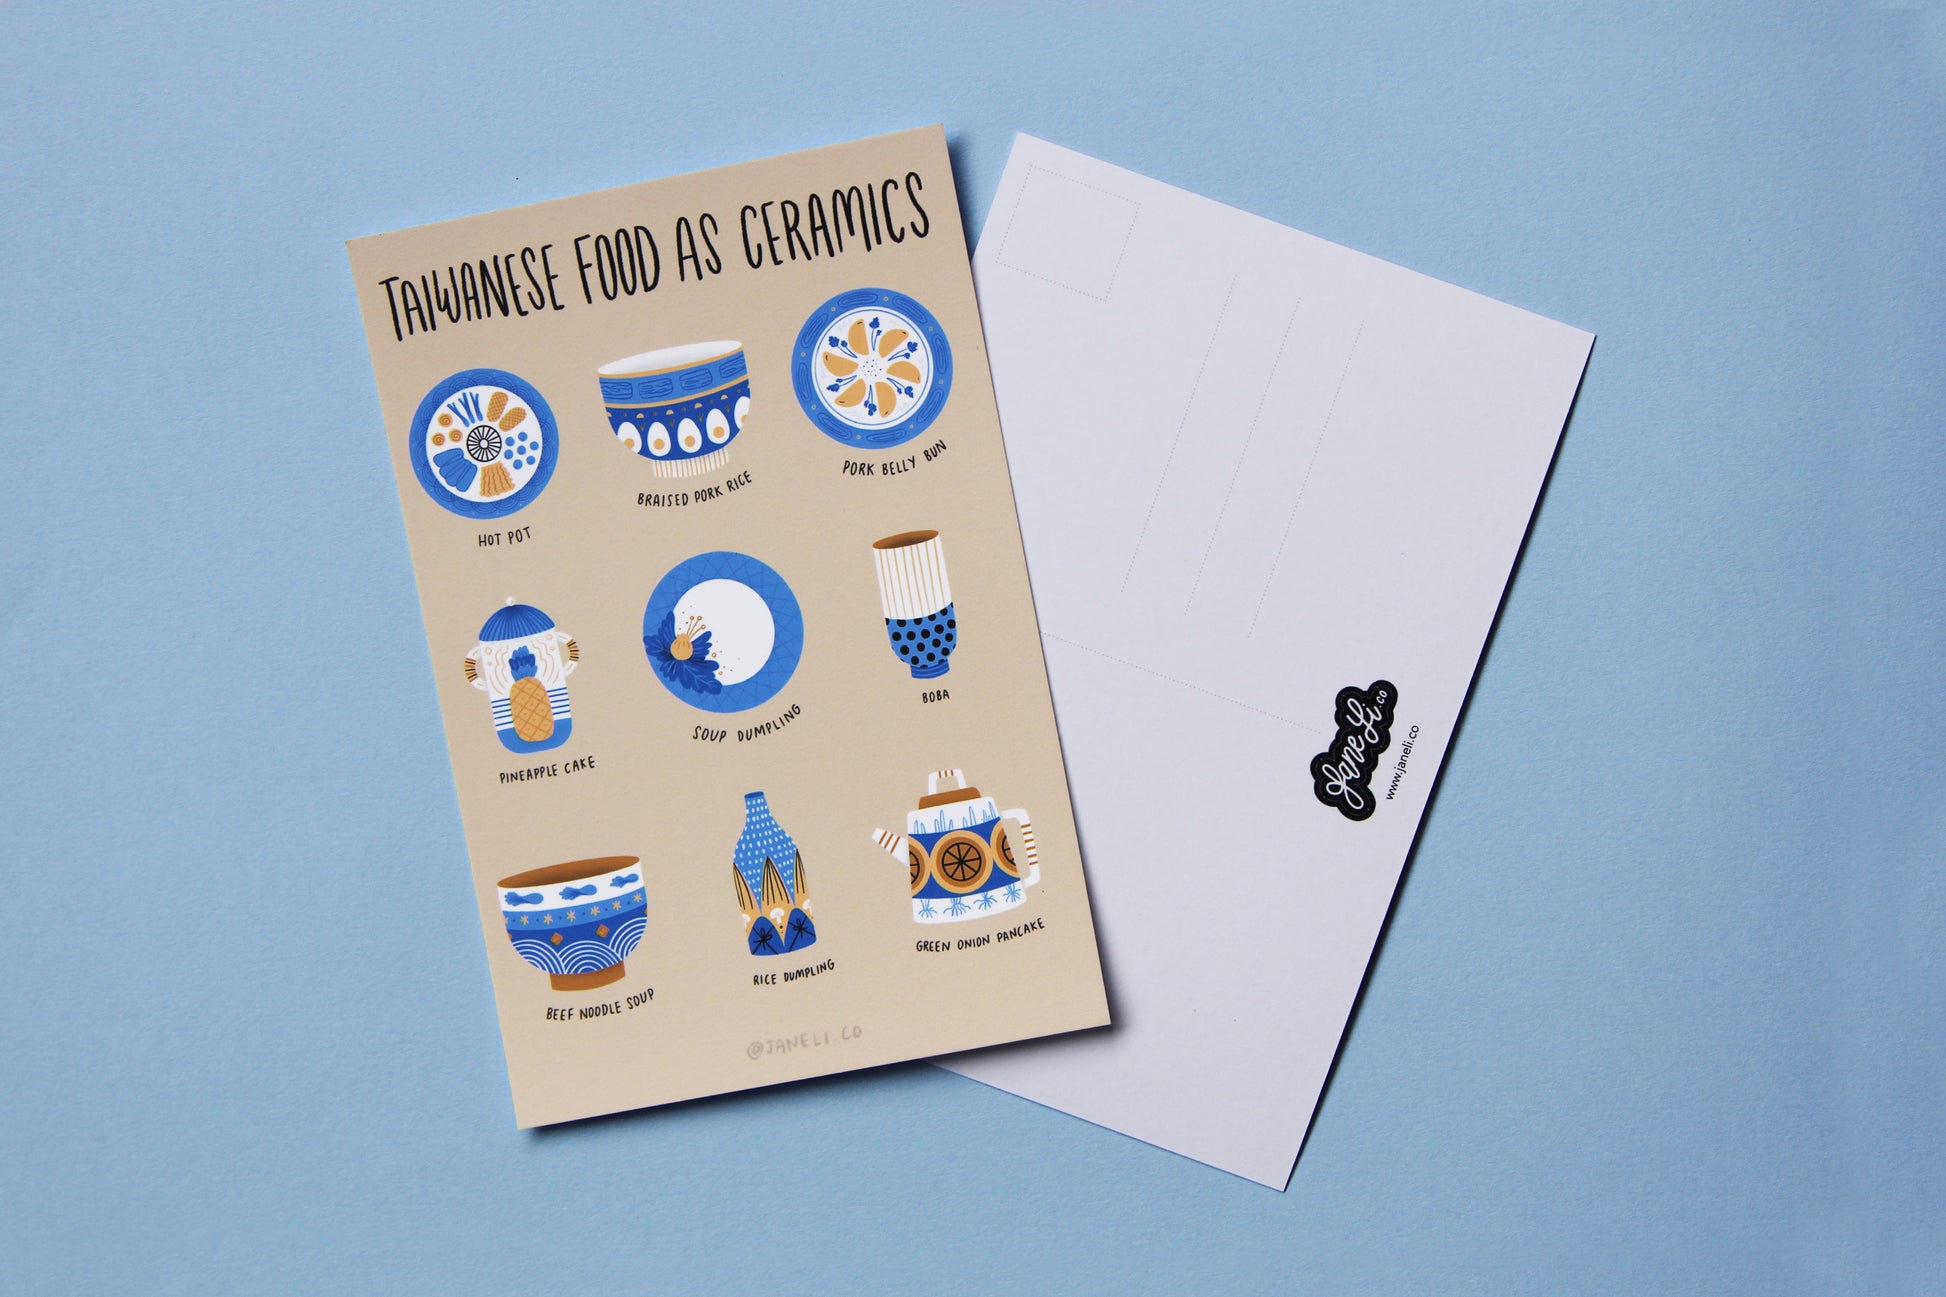 A JaneLi.Co mini print/postcard that says "Taiwanese Foods As Ceramics" with 9 different illustrations of ceramics and a back postcard side of the same print over a blue background.